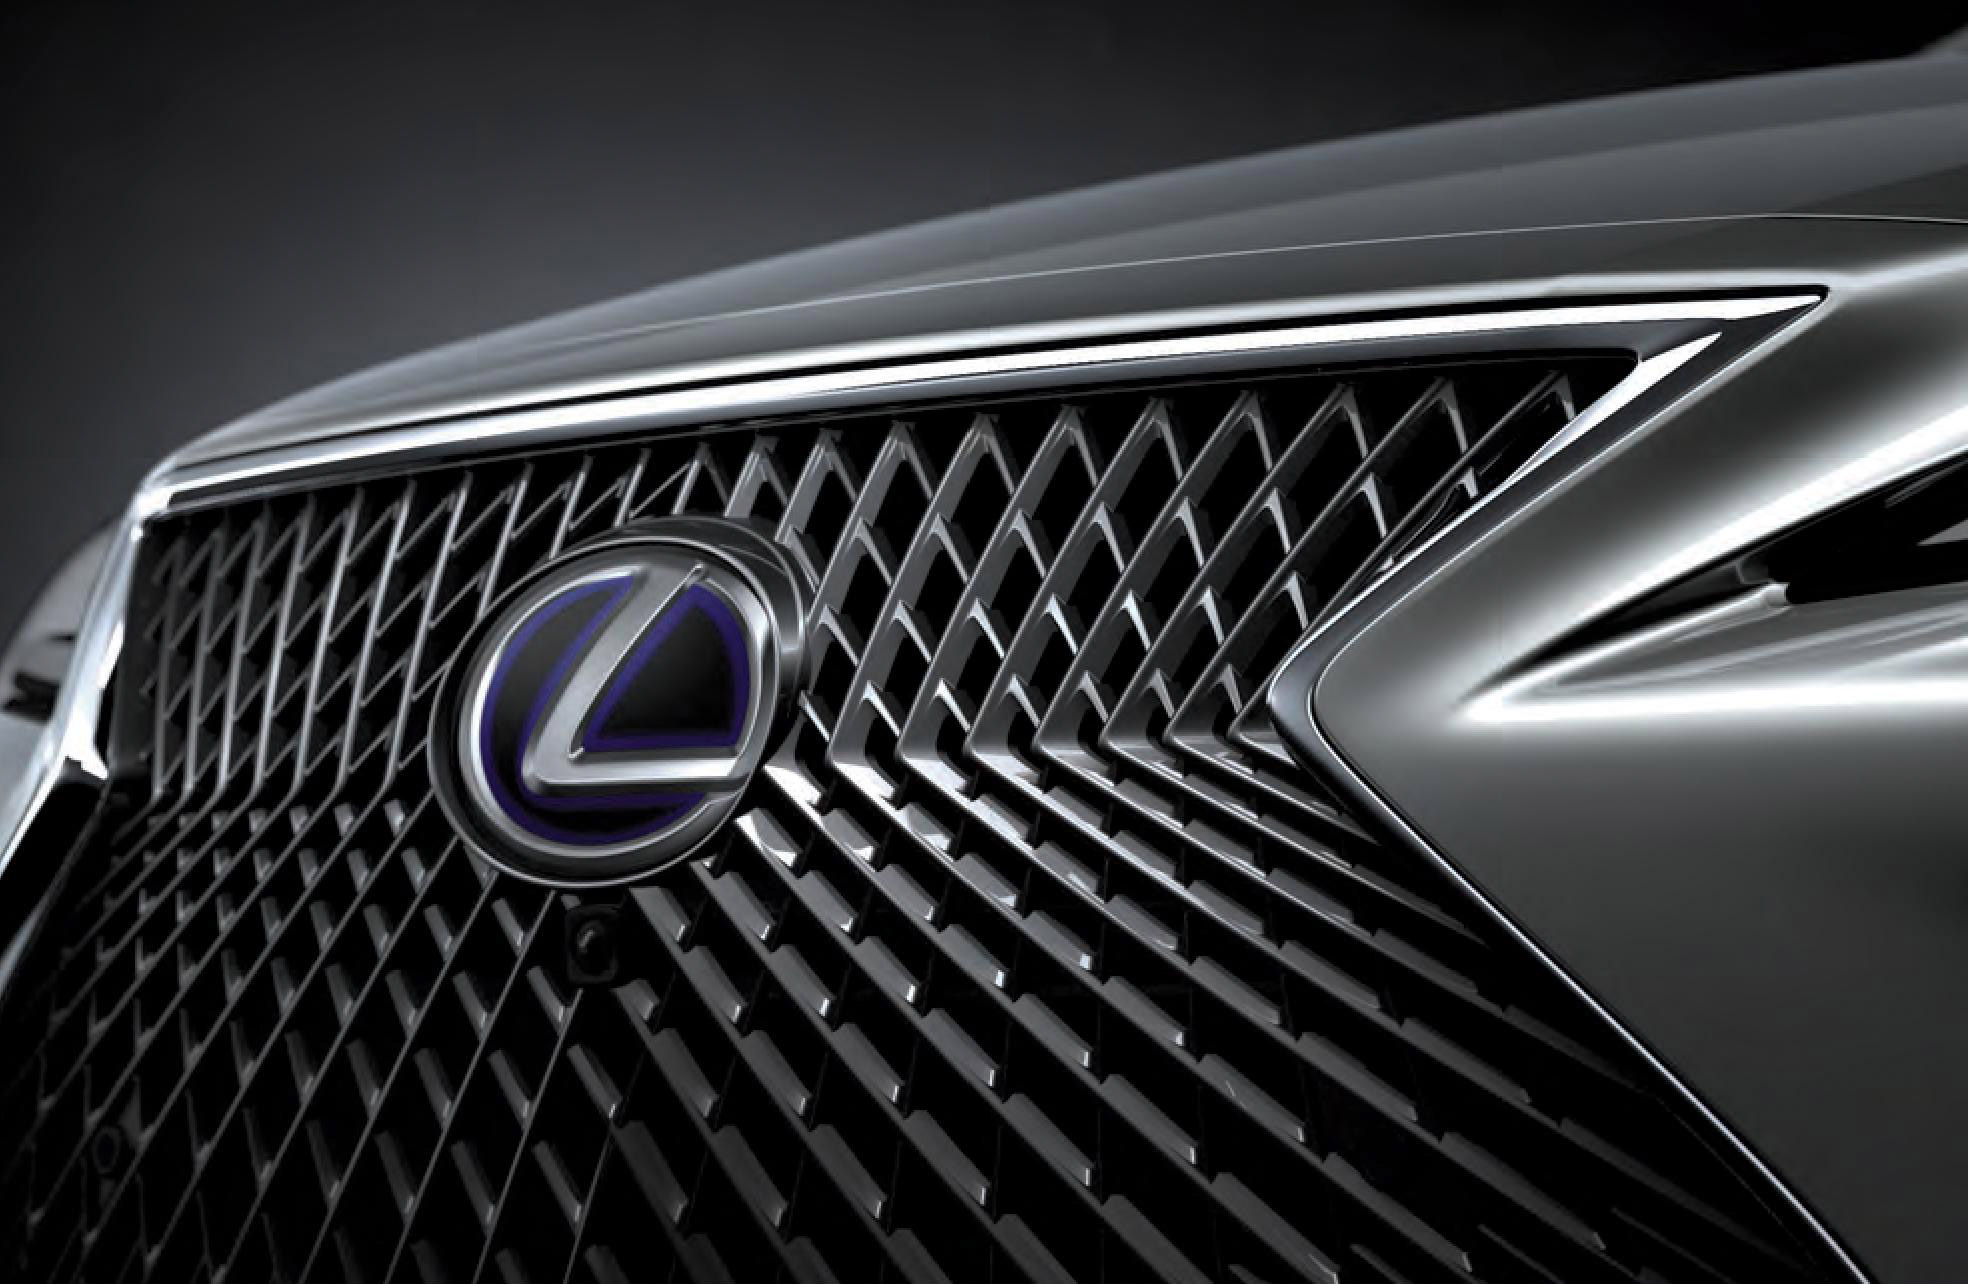 Lexus - premium brand or just an expensive Toyota? 